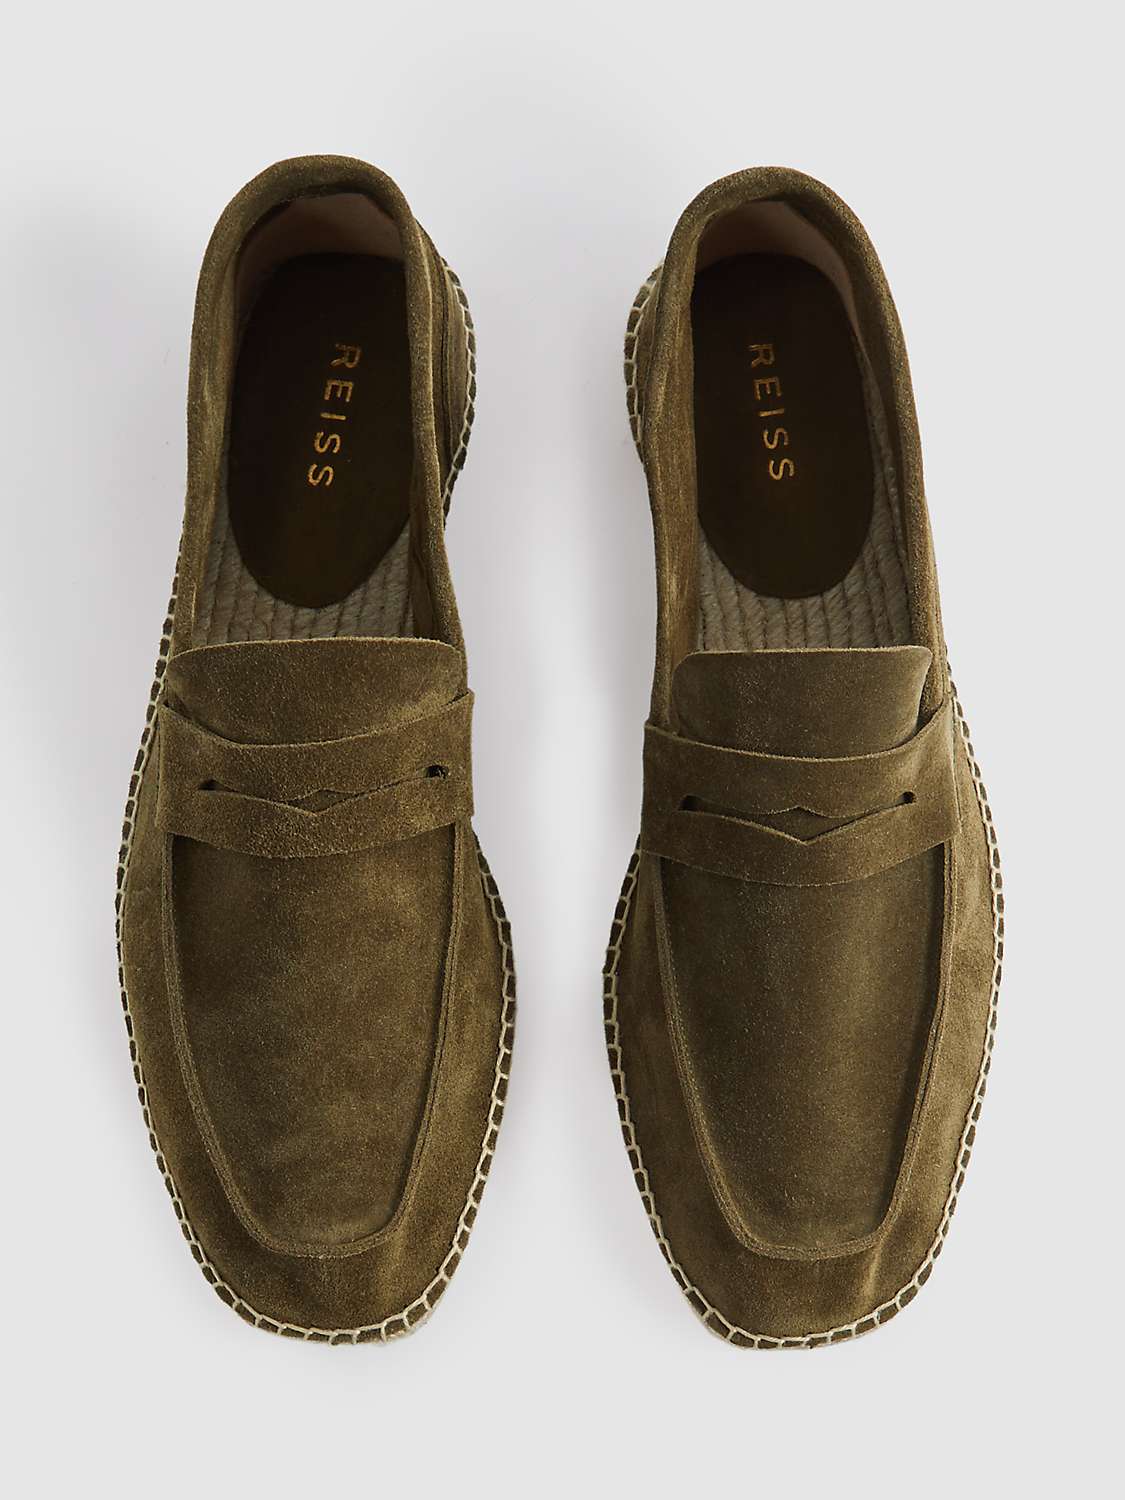 Buy Reiss Cannes Suede Espadrille Online at johnlewis.com